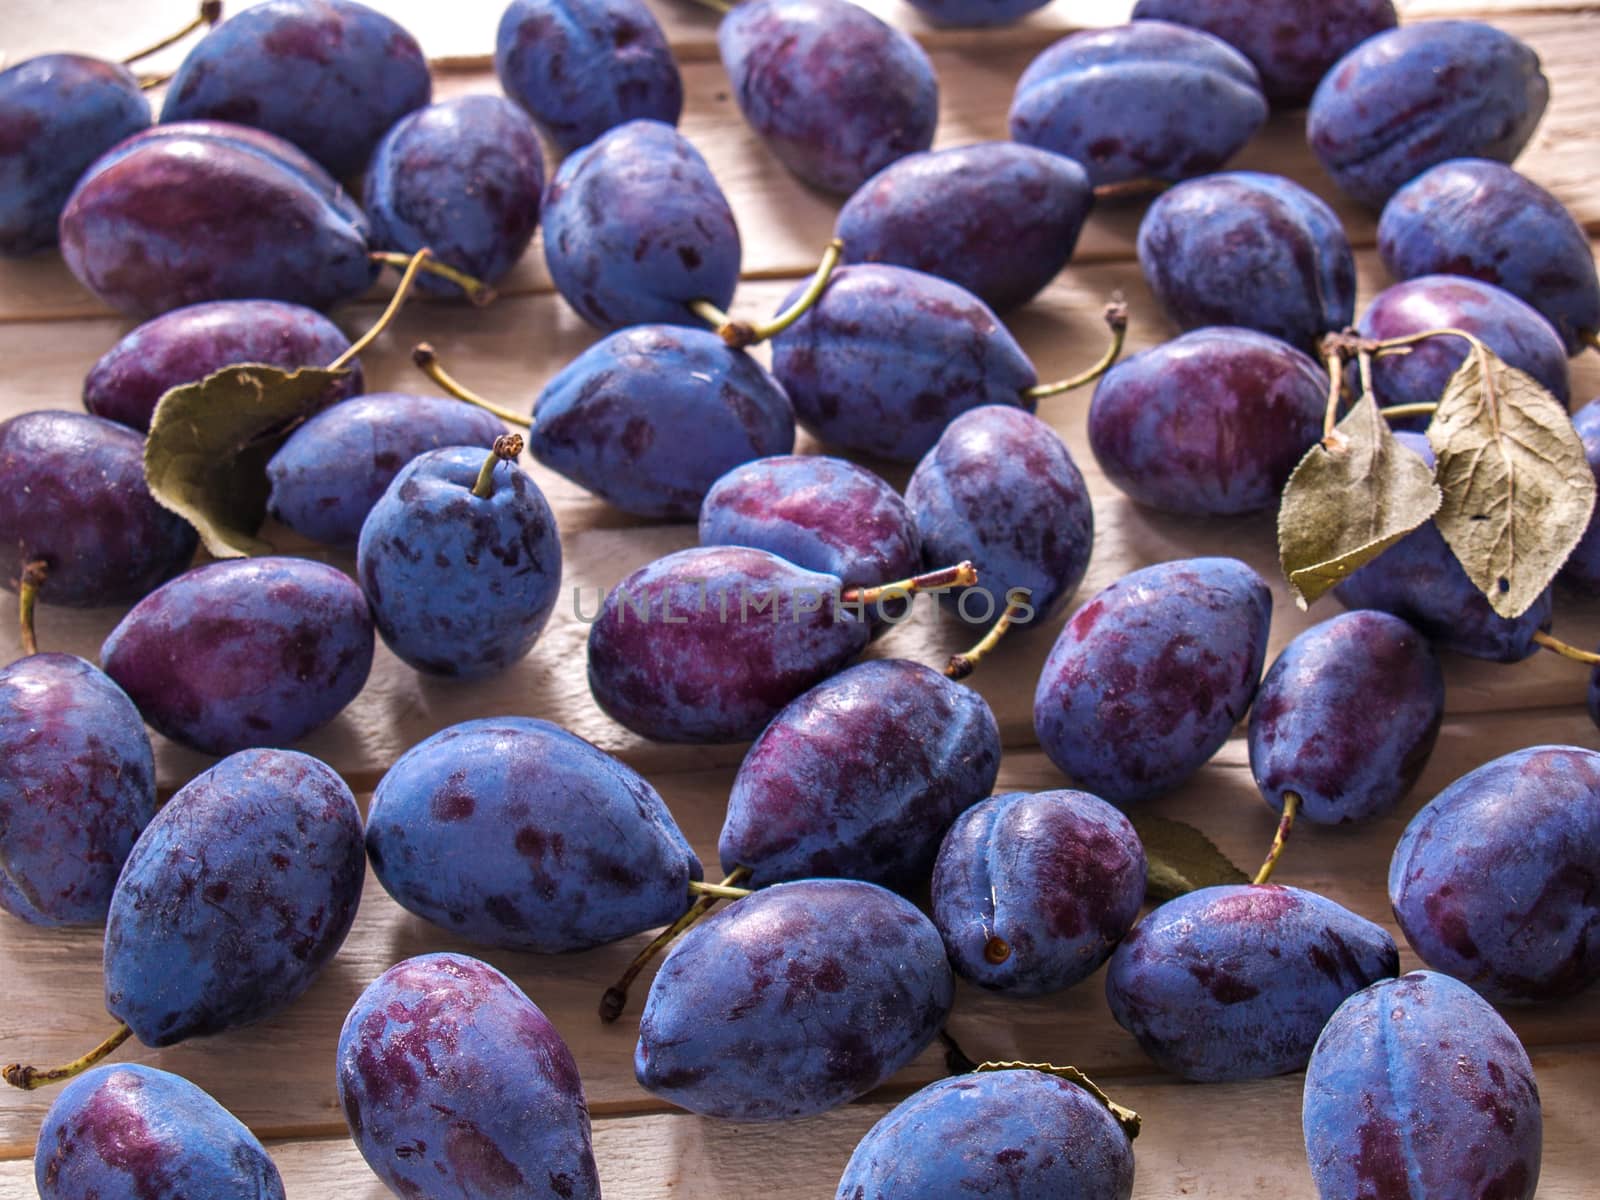 Plums juicy blue sweet new crop fruit healthy diet food dessert lie on a wooden background spilled with green leaves